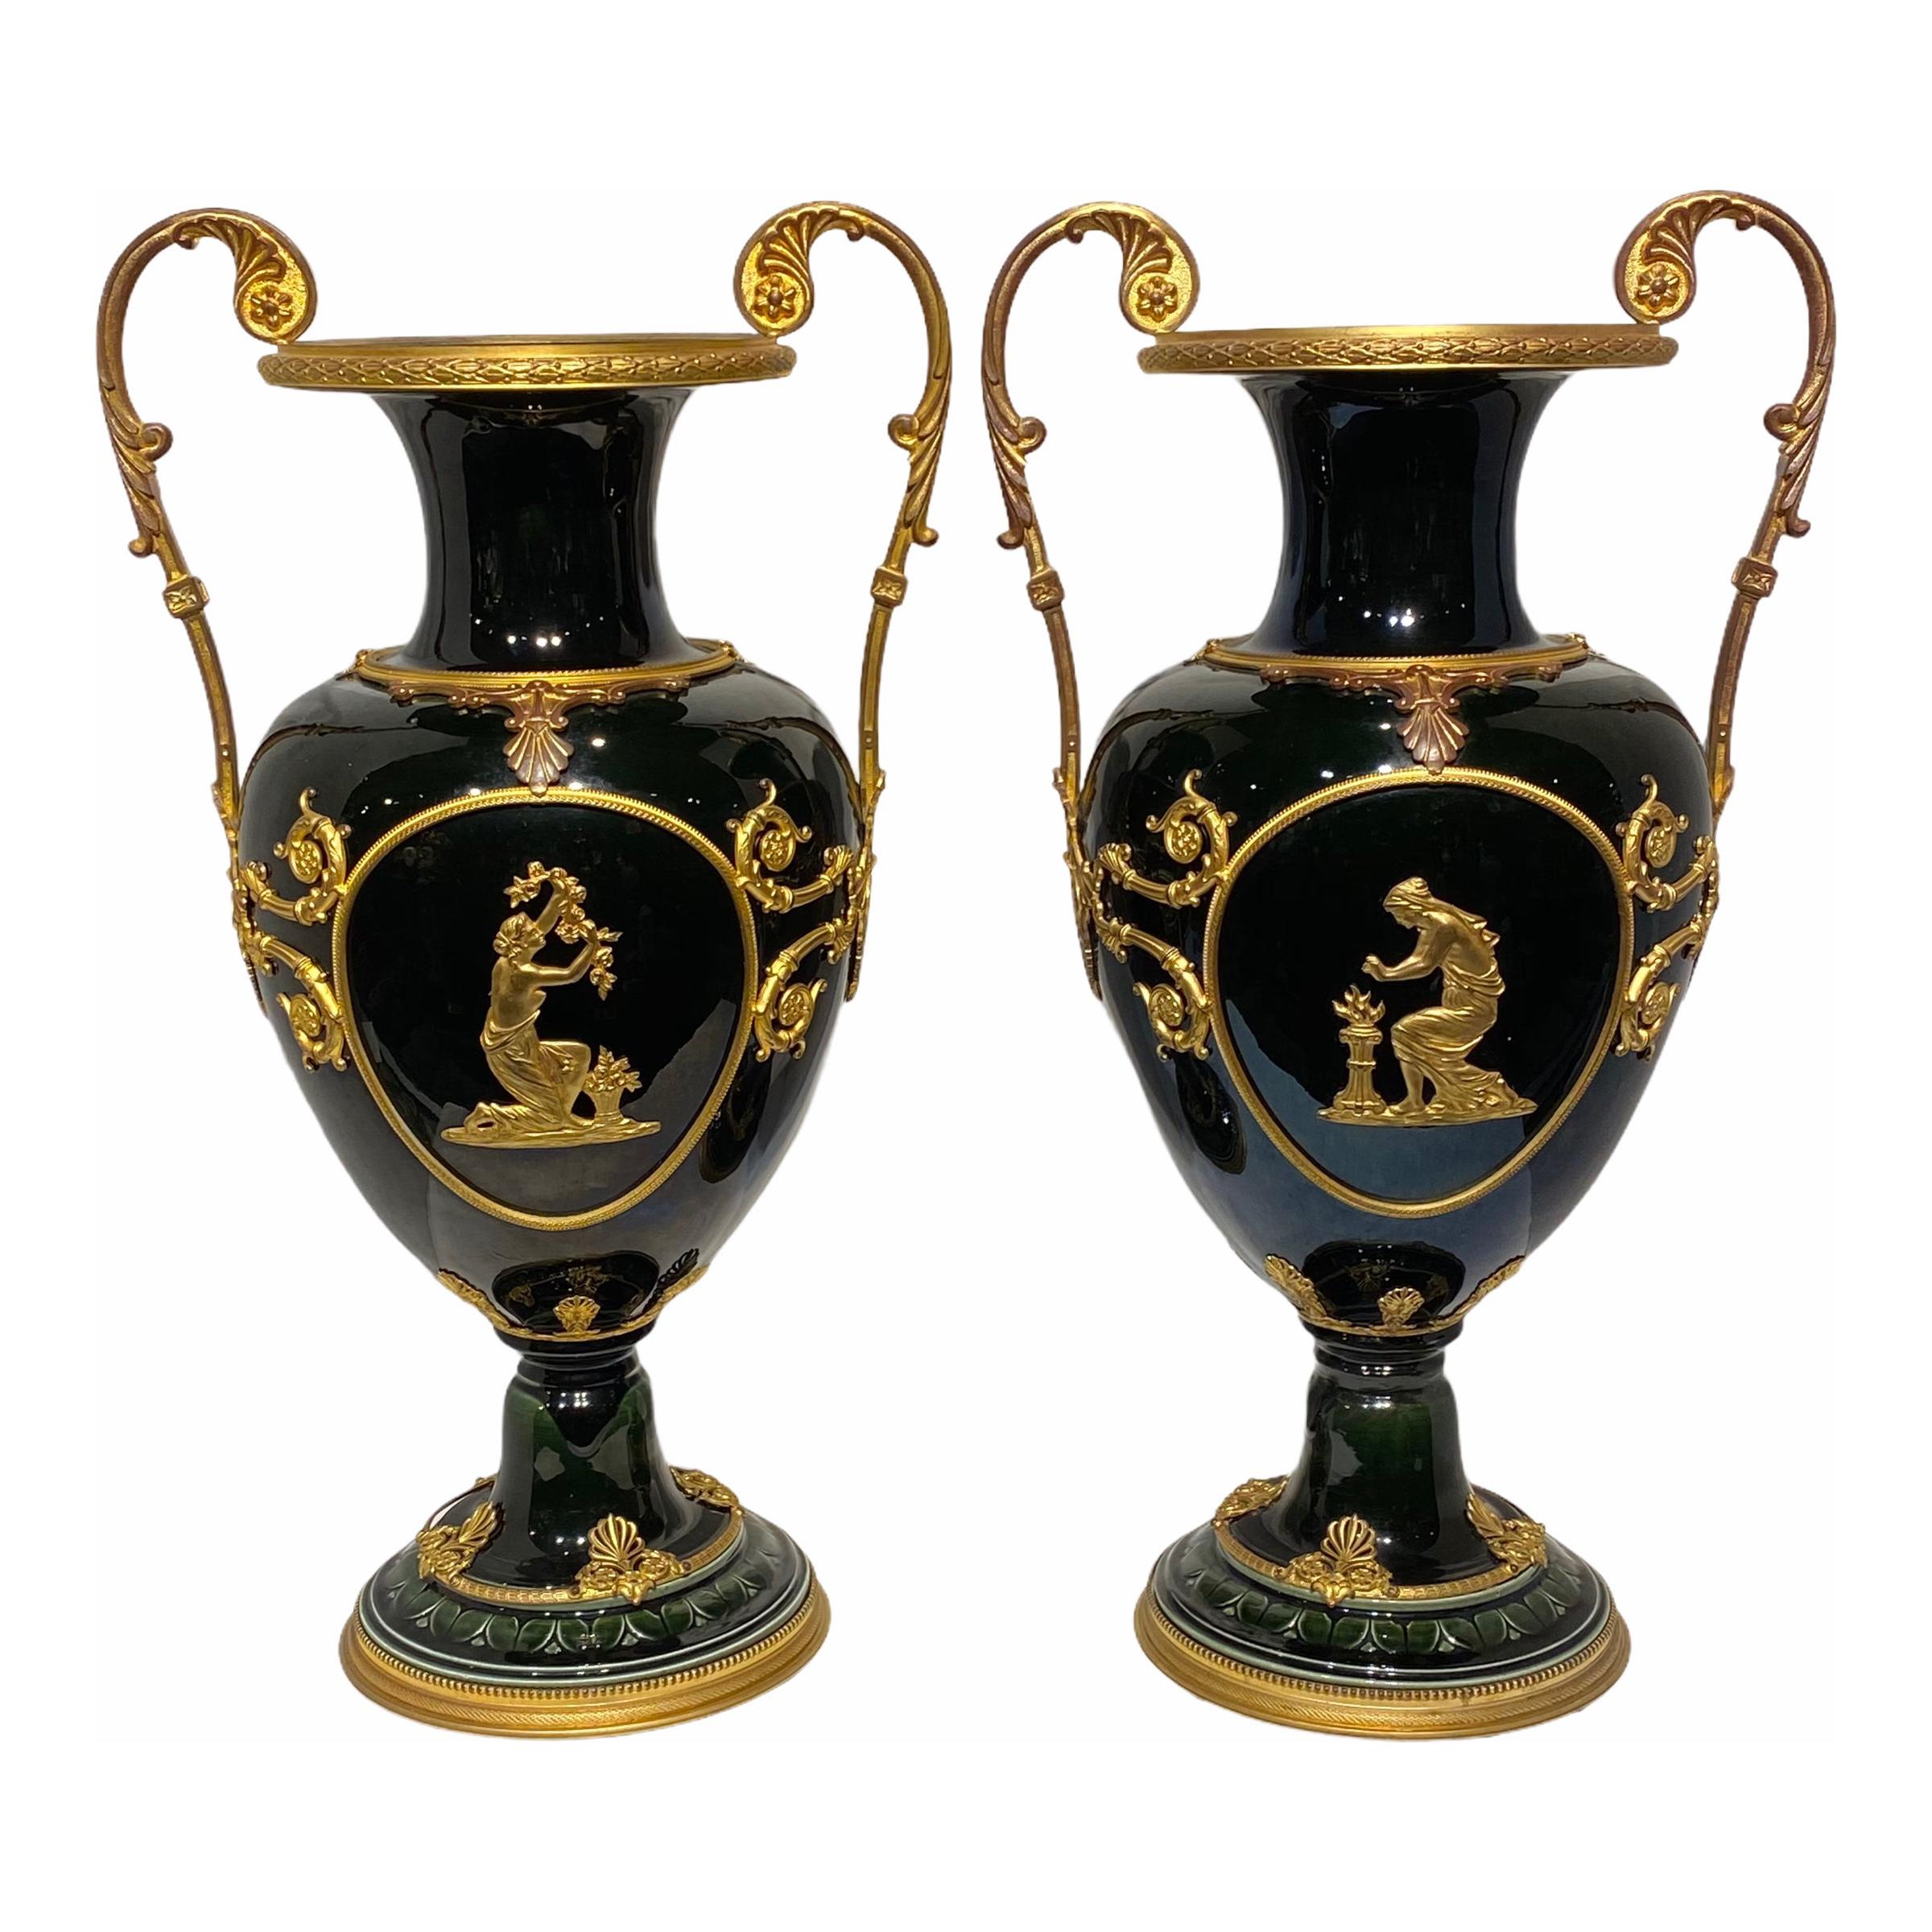 Iridescent Glazed Faience Vases with Neoclassical Gilt Bronze Mounts For Sale